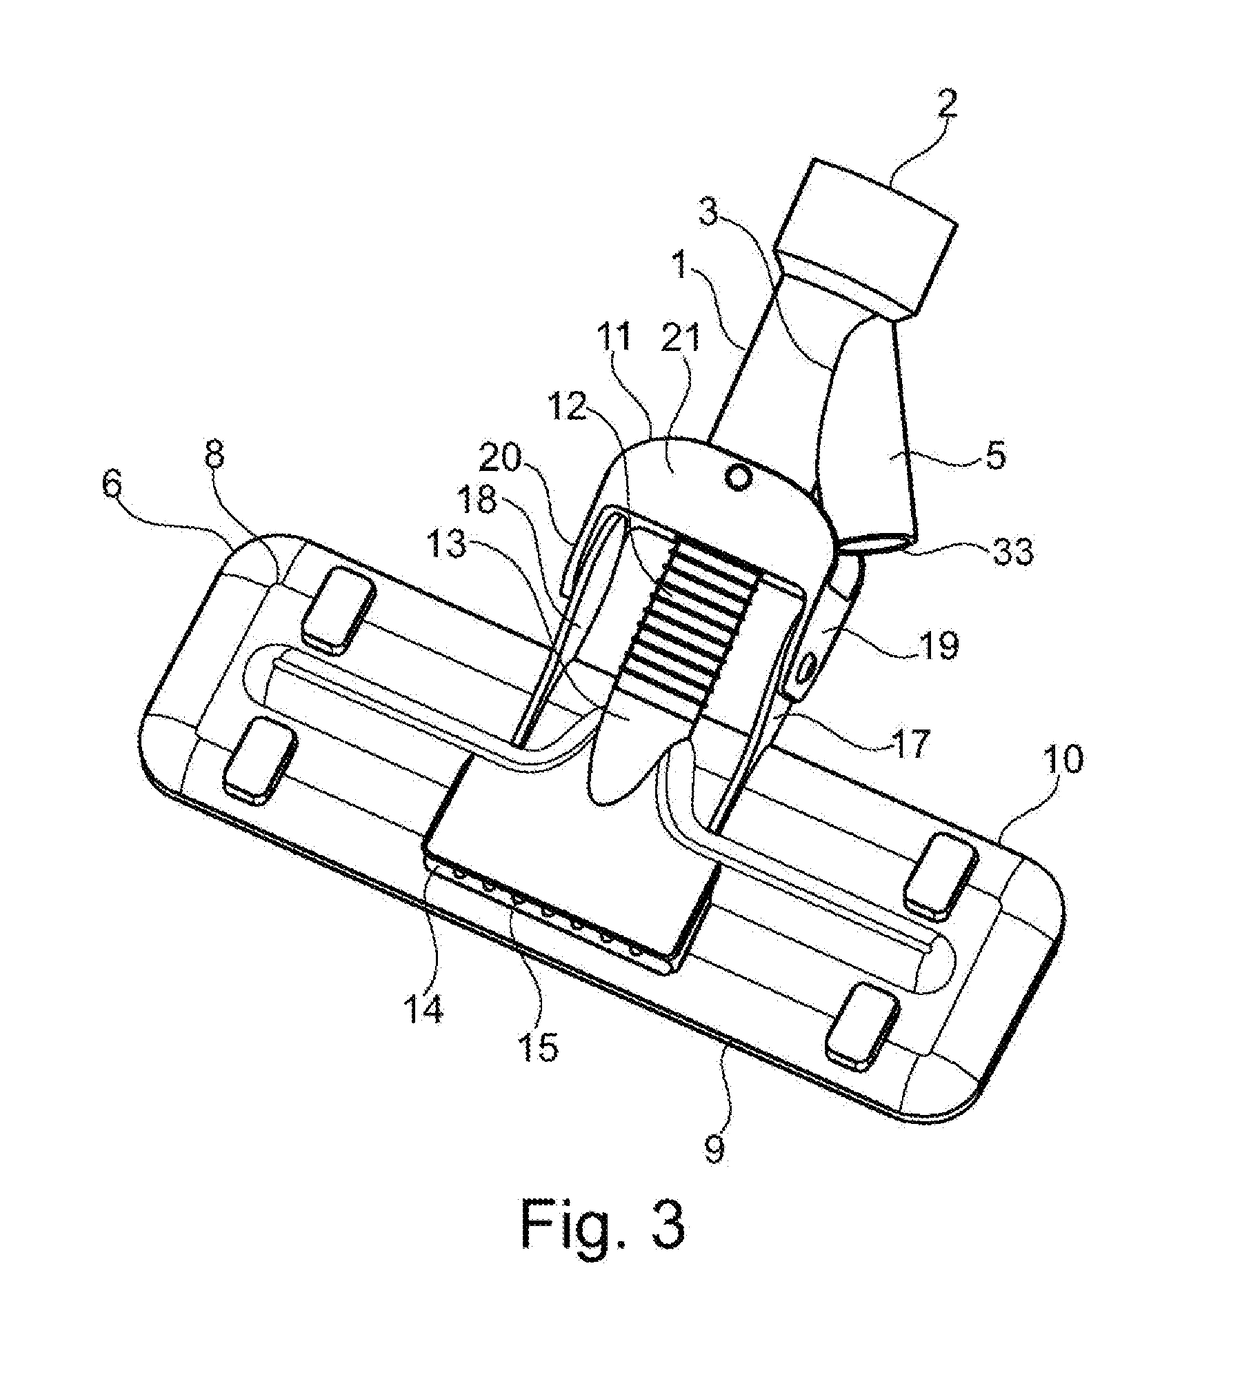 Electricity producing flexible and slim nozzle for being releasably connected to a suction source of a vacuum cleaner